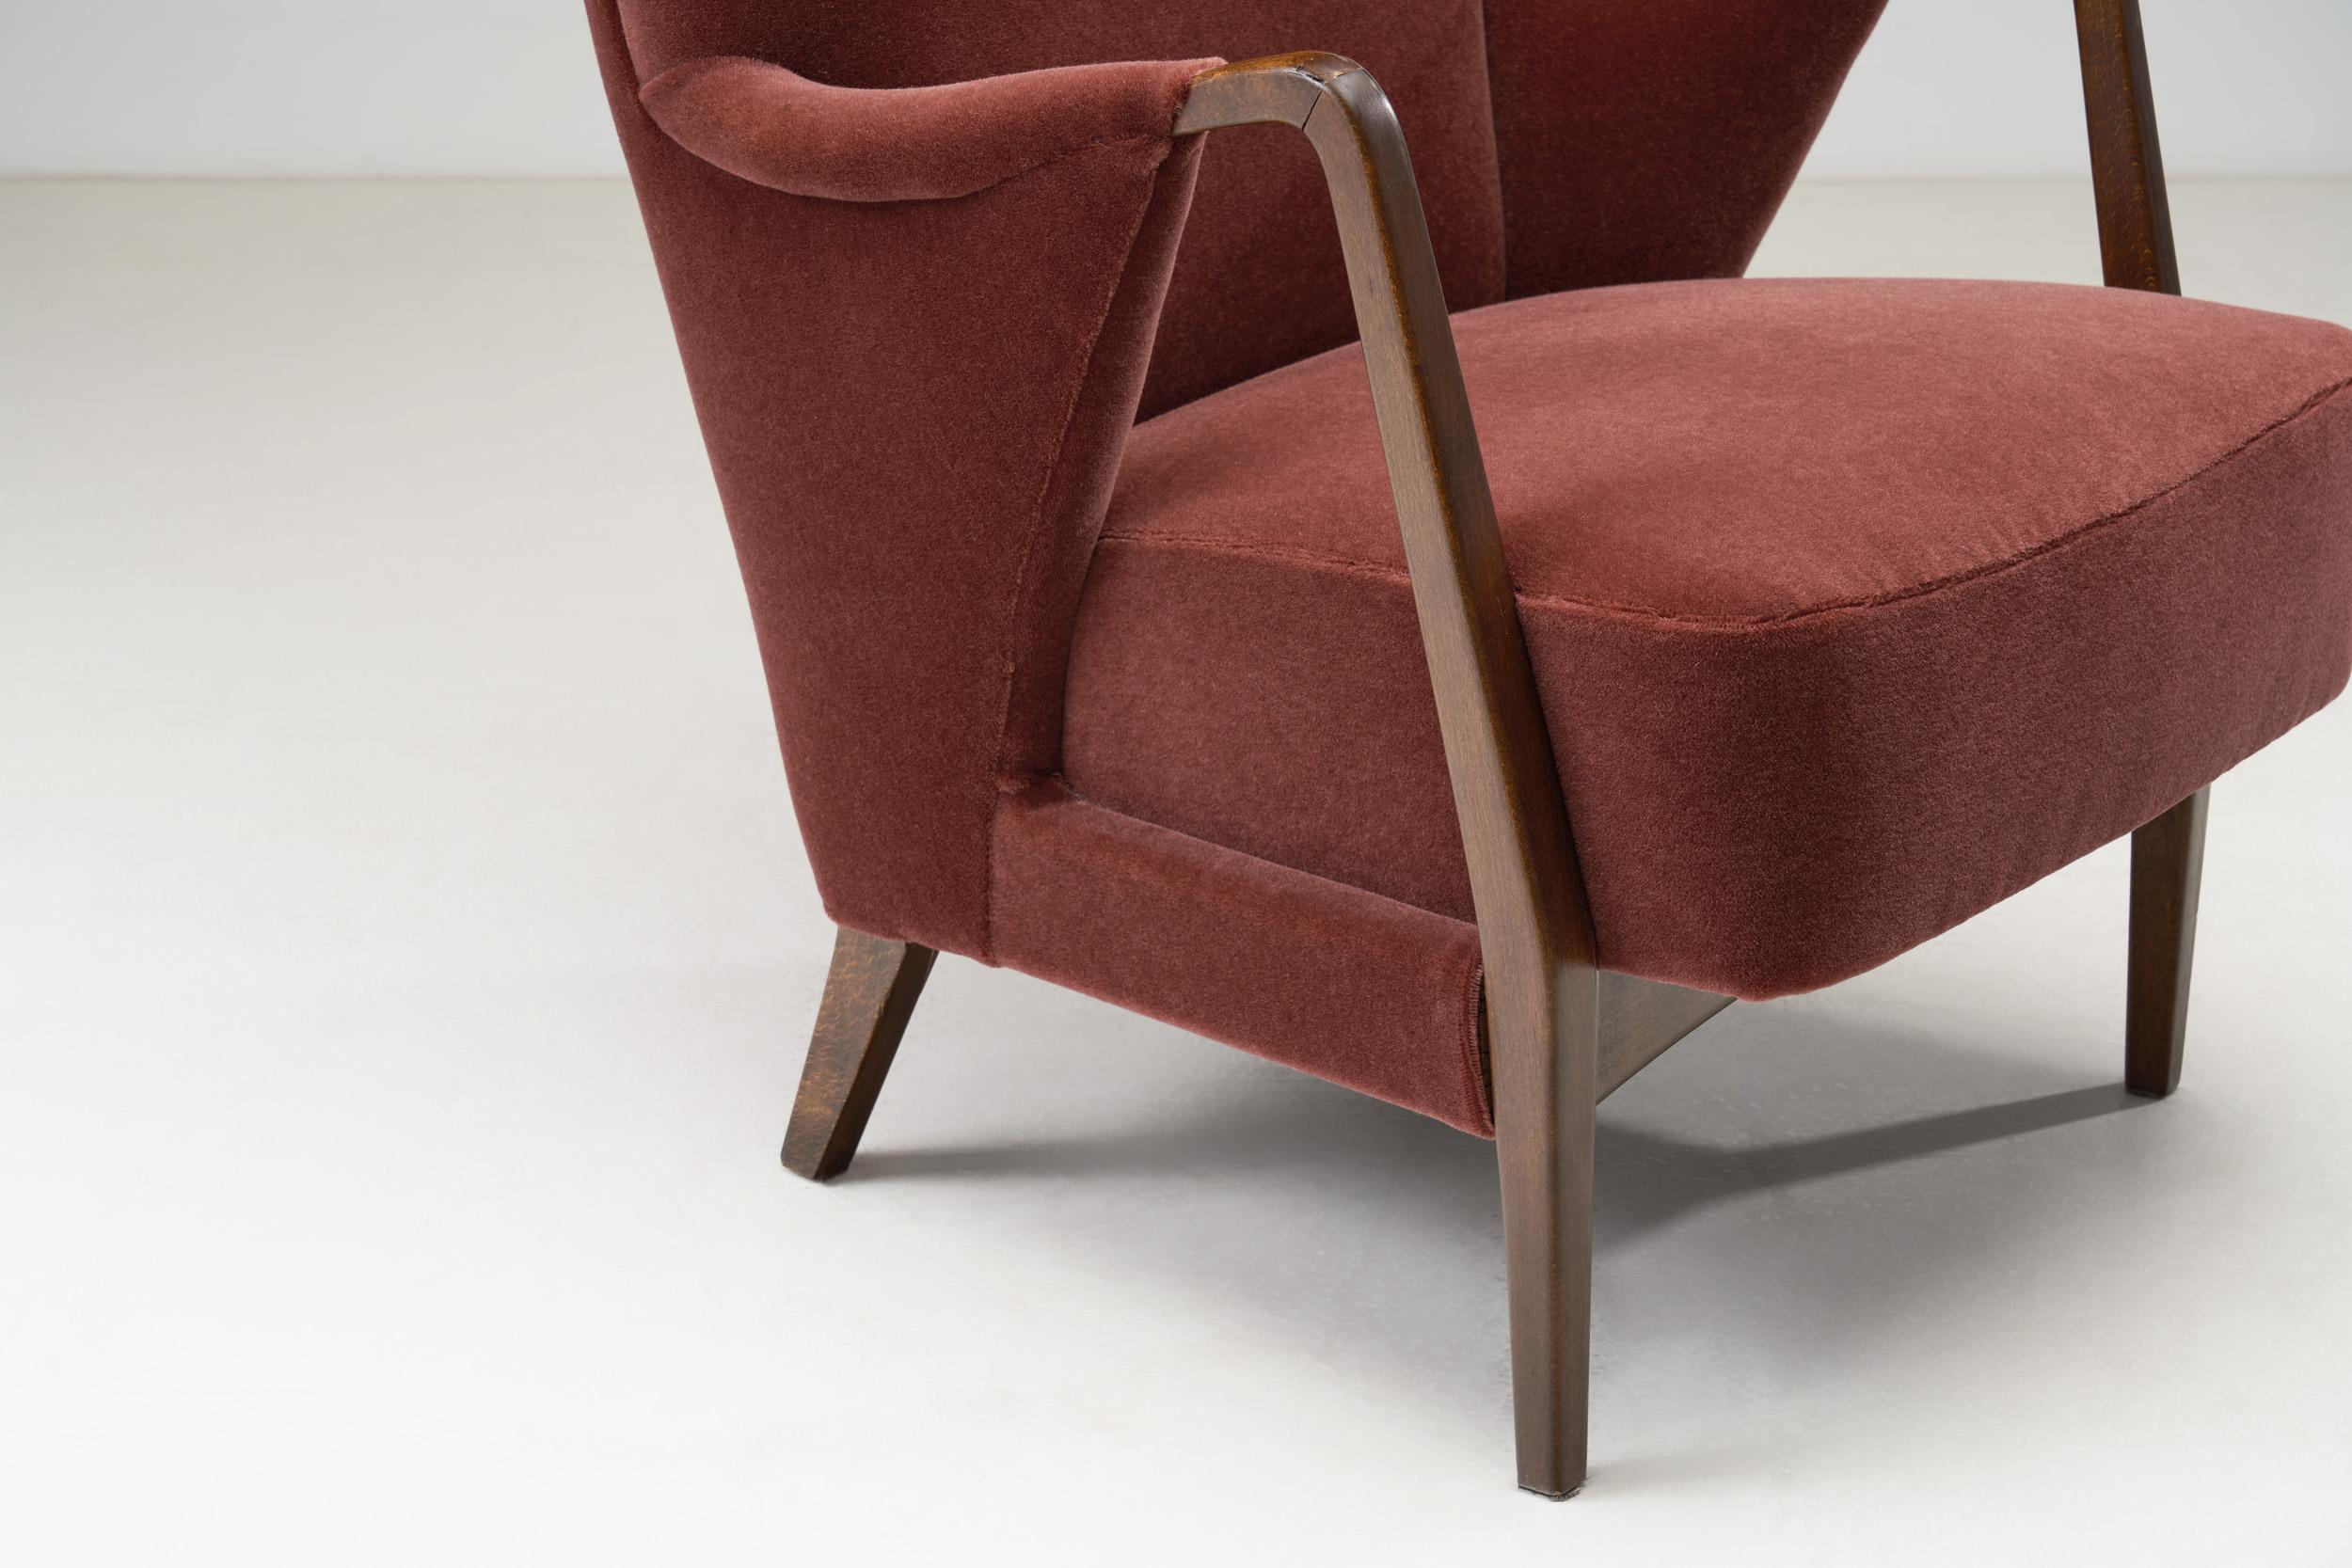 Danish Cabinetmaker High-Back Chair with Stained Beech Arms, Denmark, 1950s For Sale 6